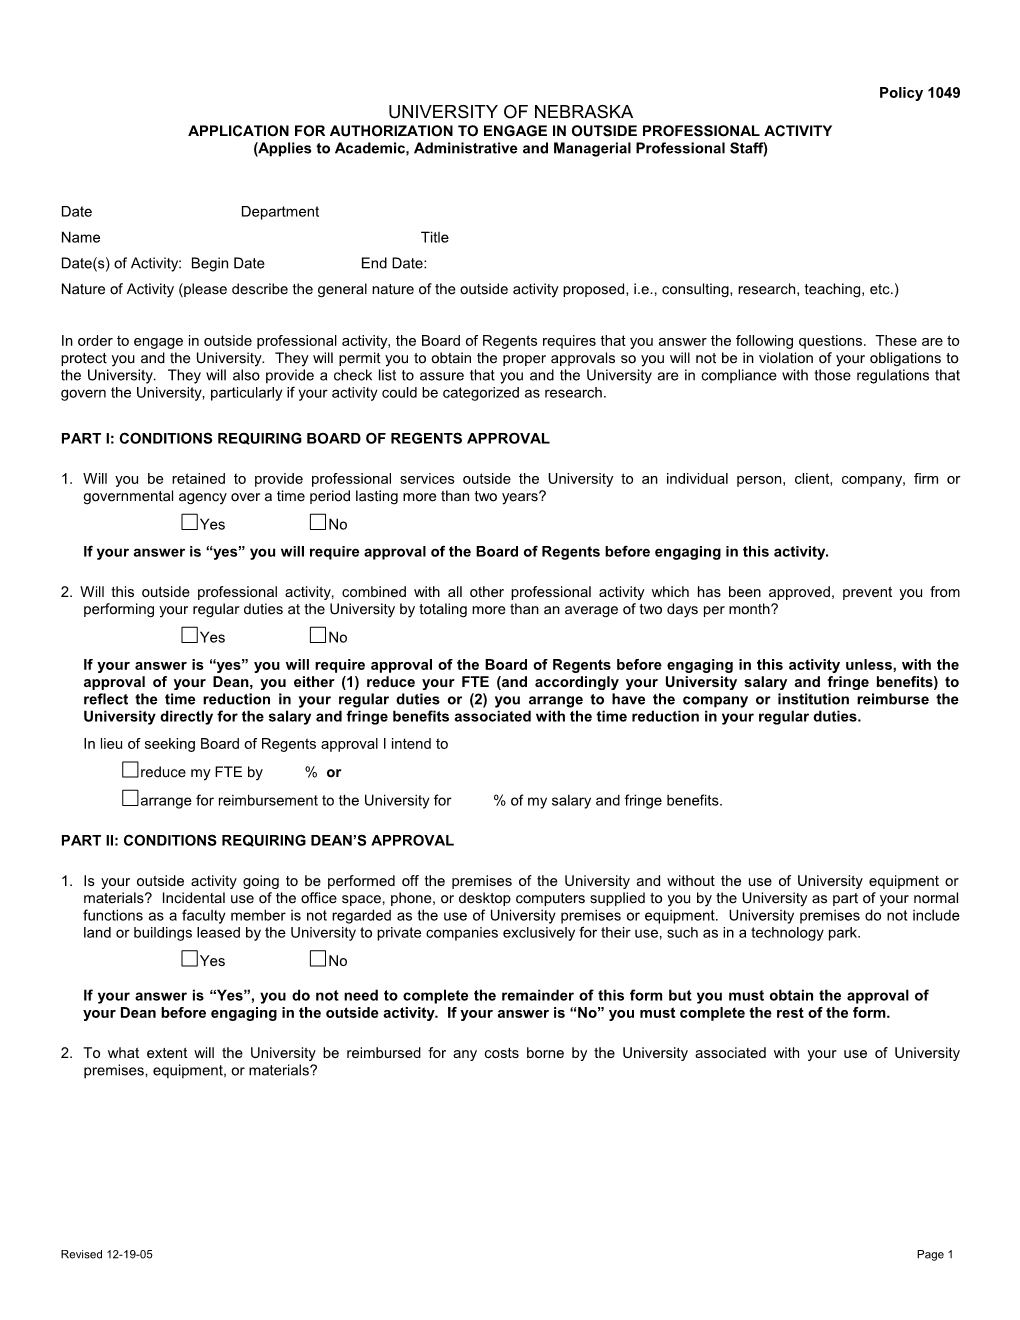 Outside Activity Revised Form 12-19-05